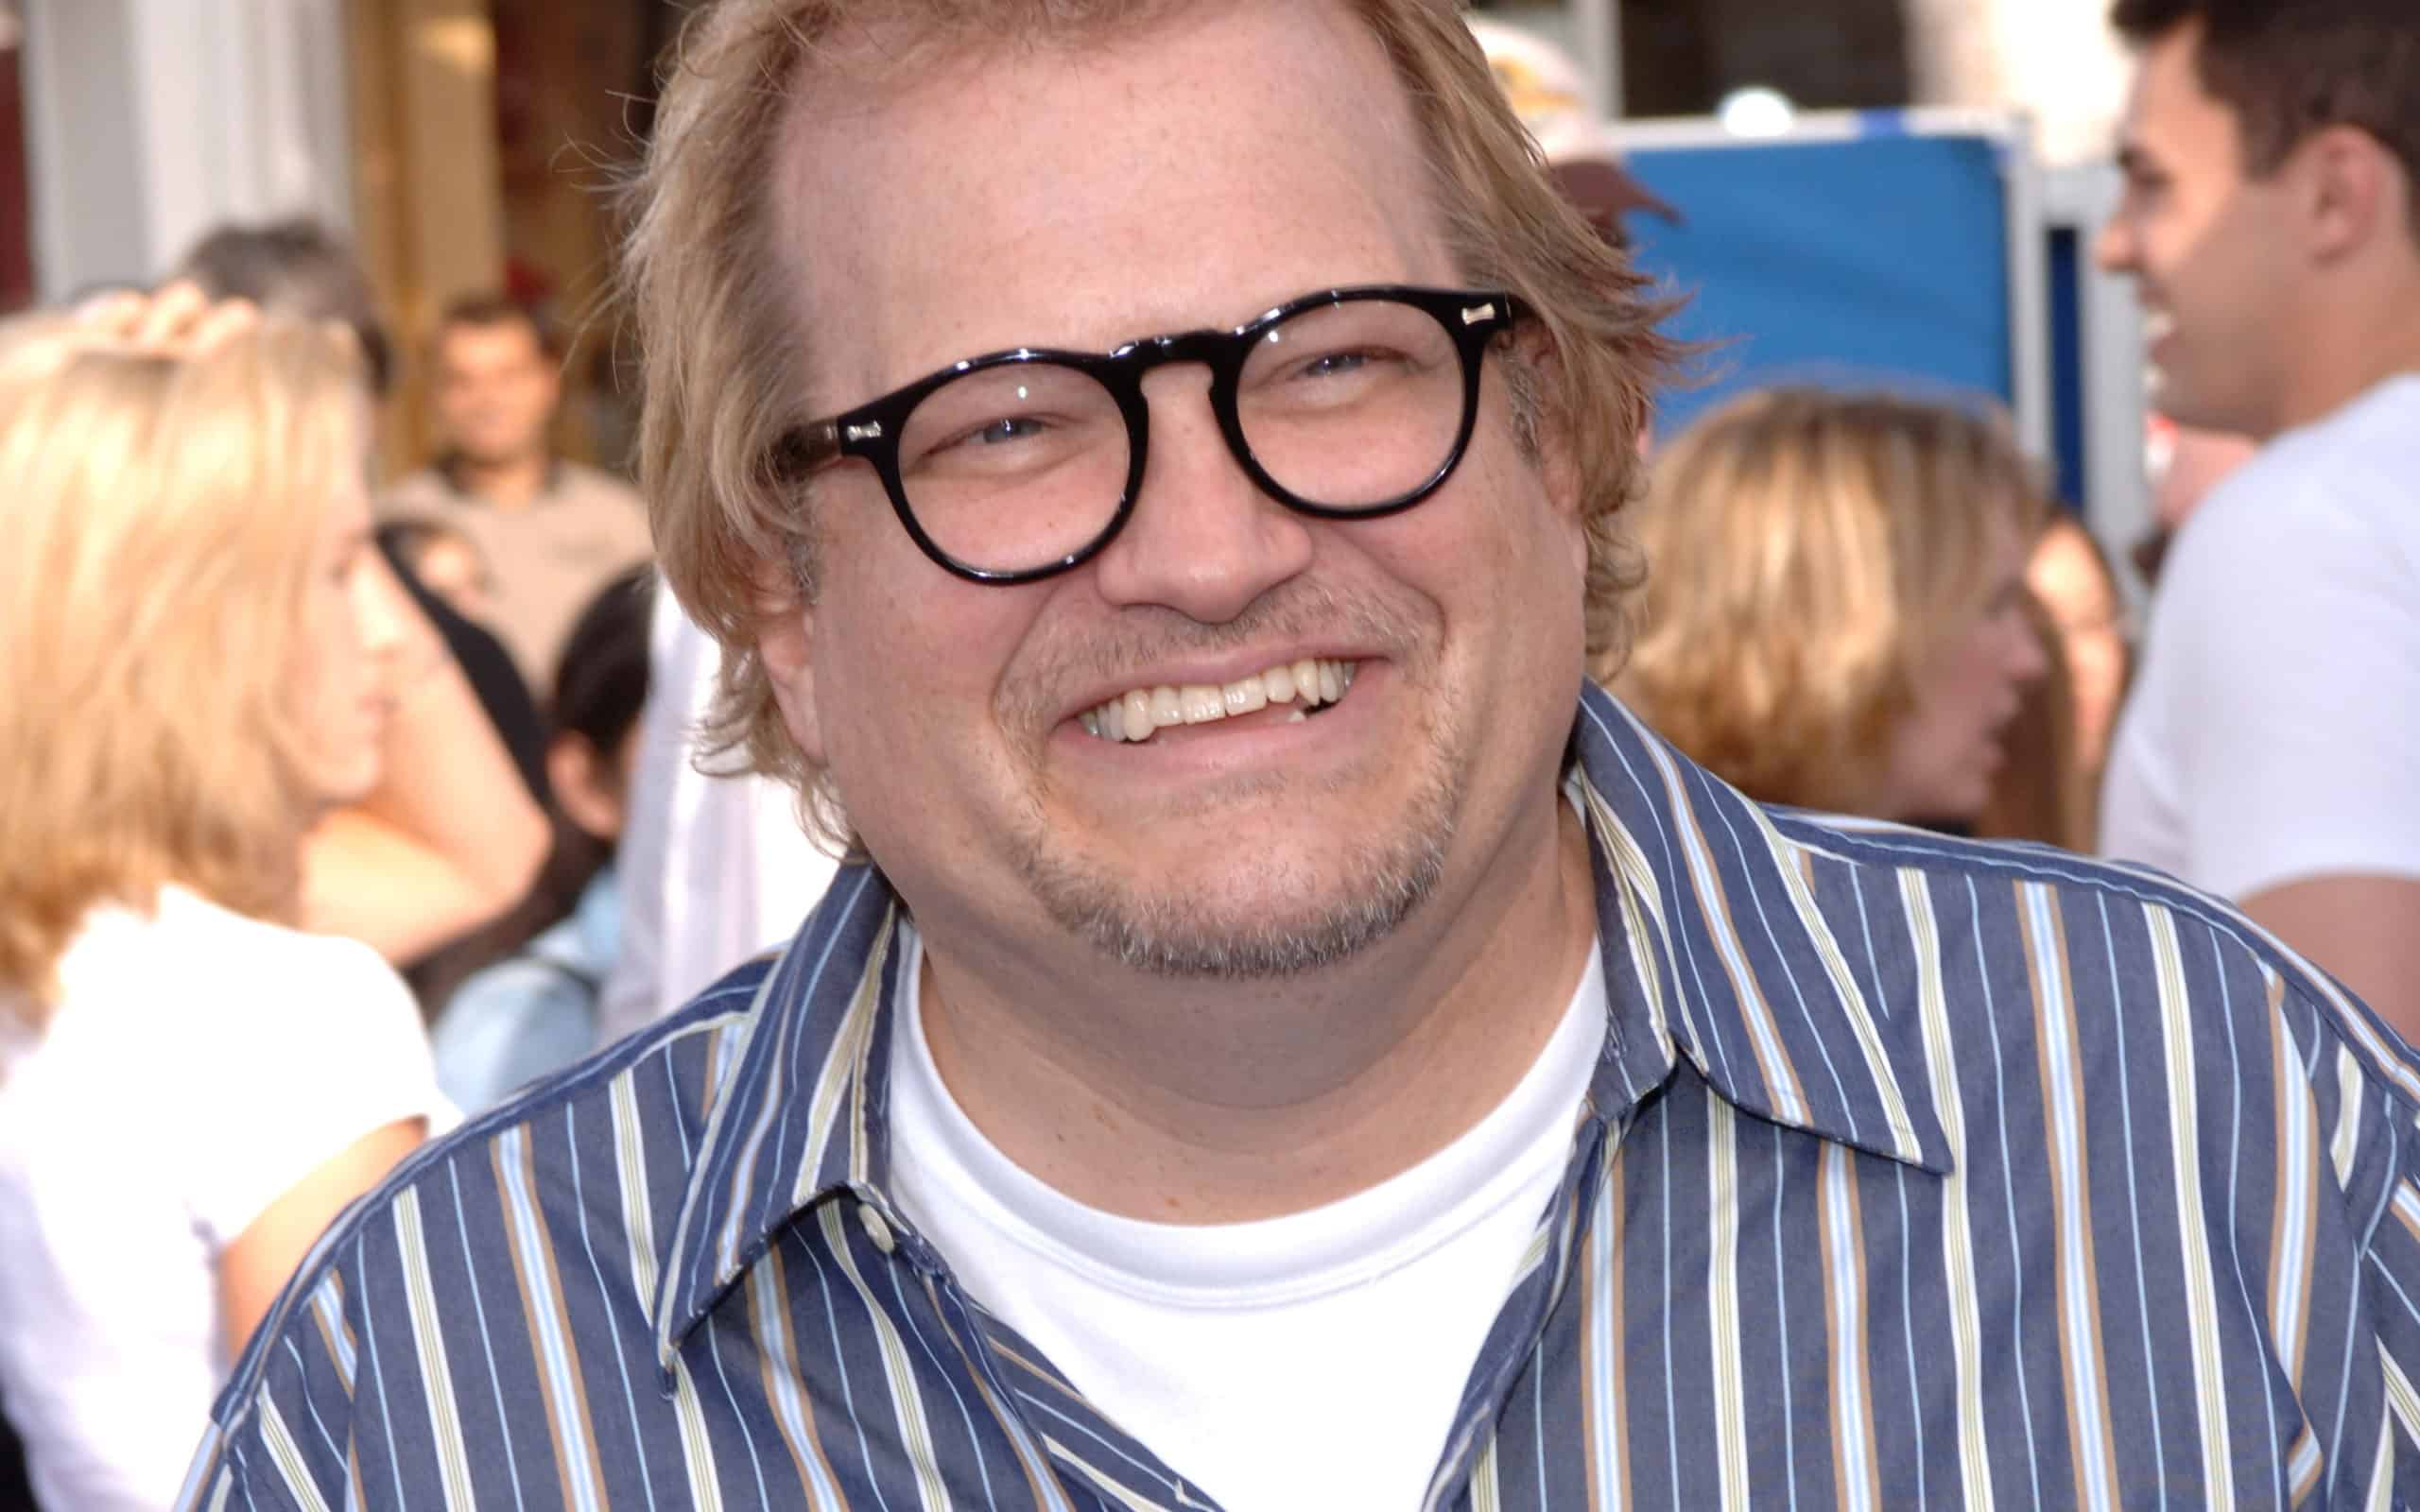 Actor Drew Carey At The World Premiere Premiere Of His